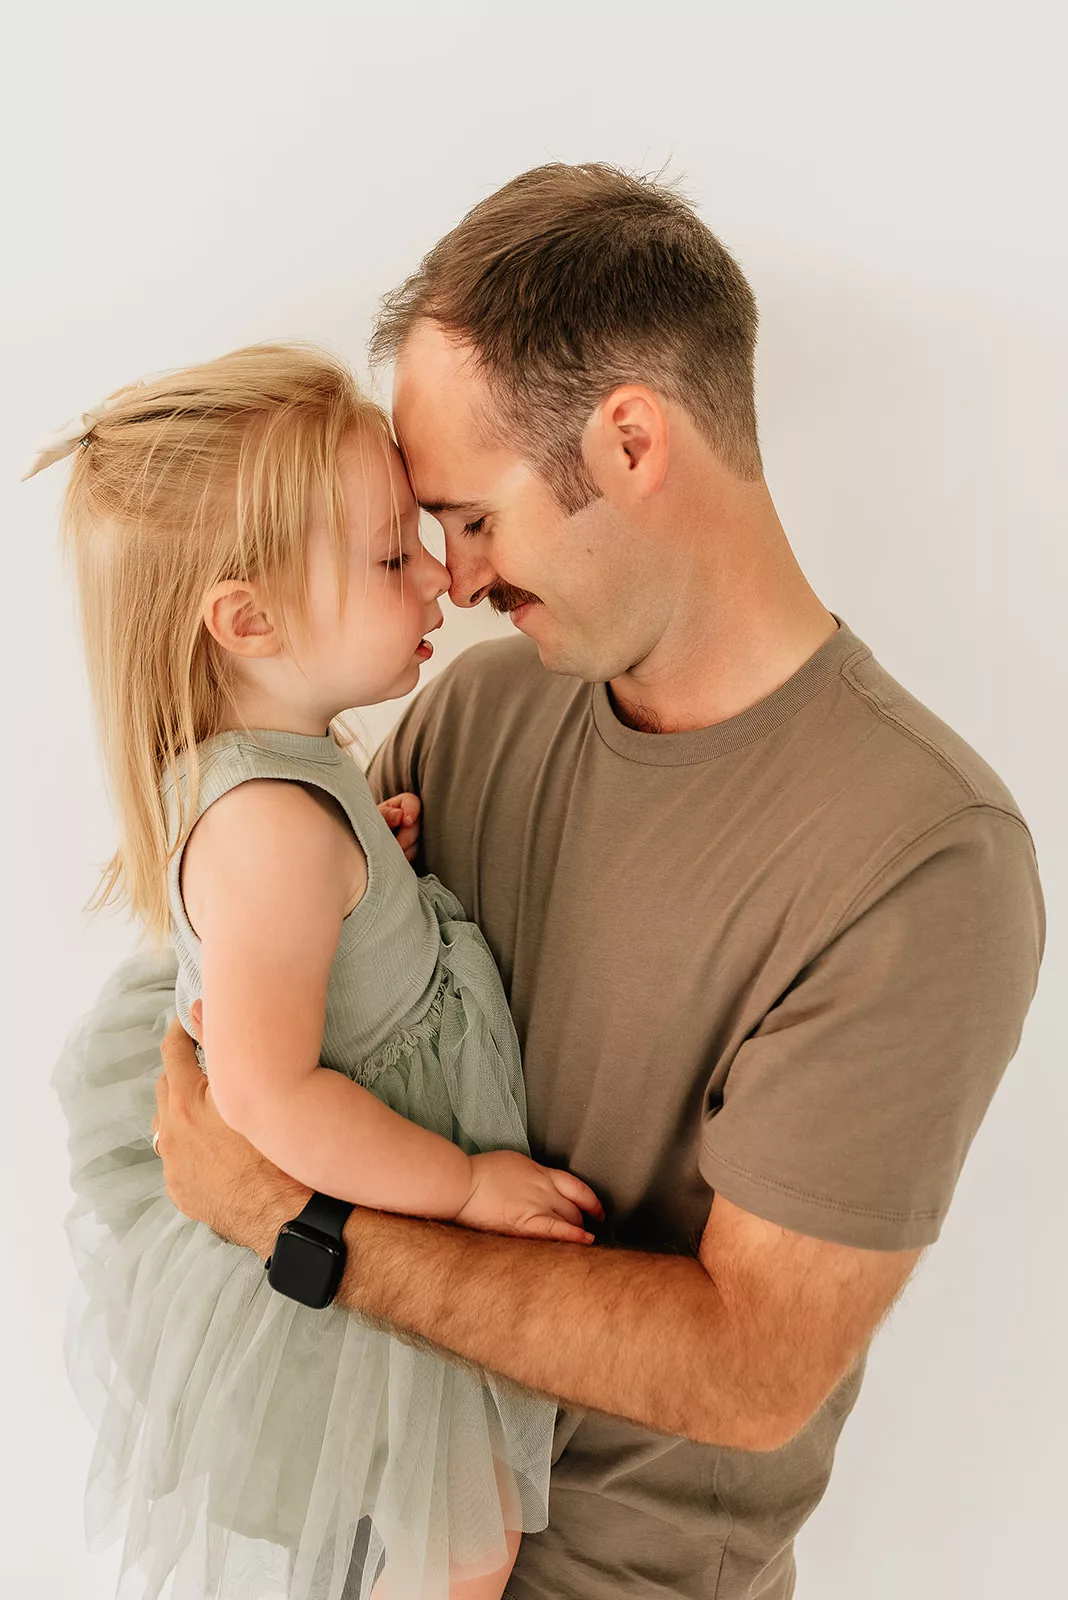 A father nuzzles noses with his toddler daughter sitting in his arms while standing in a studio